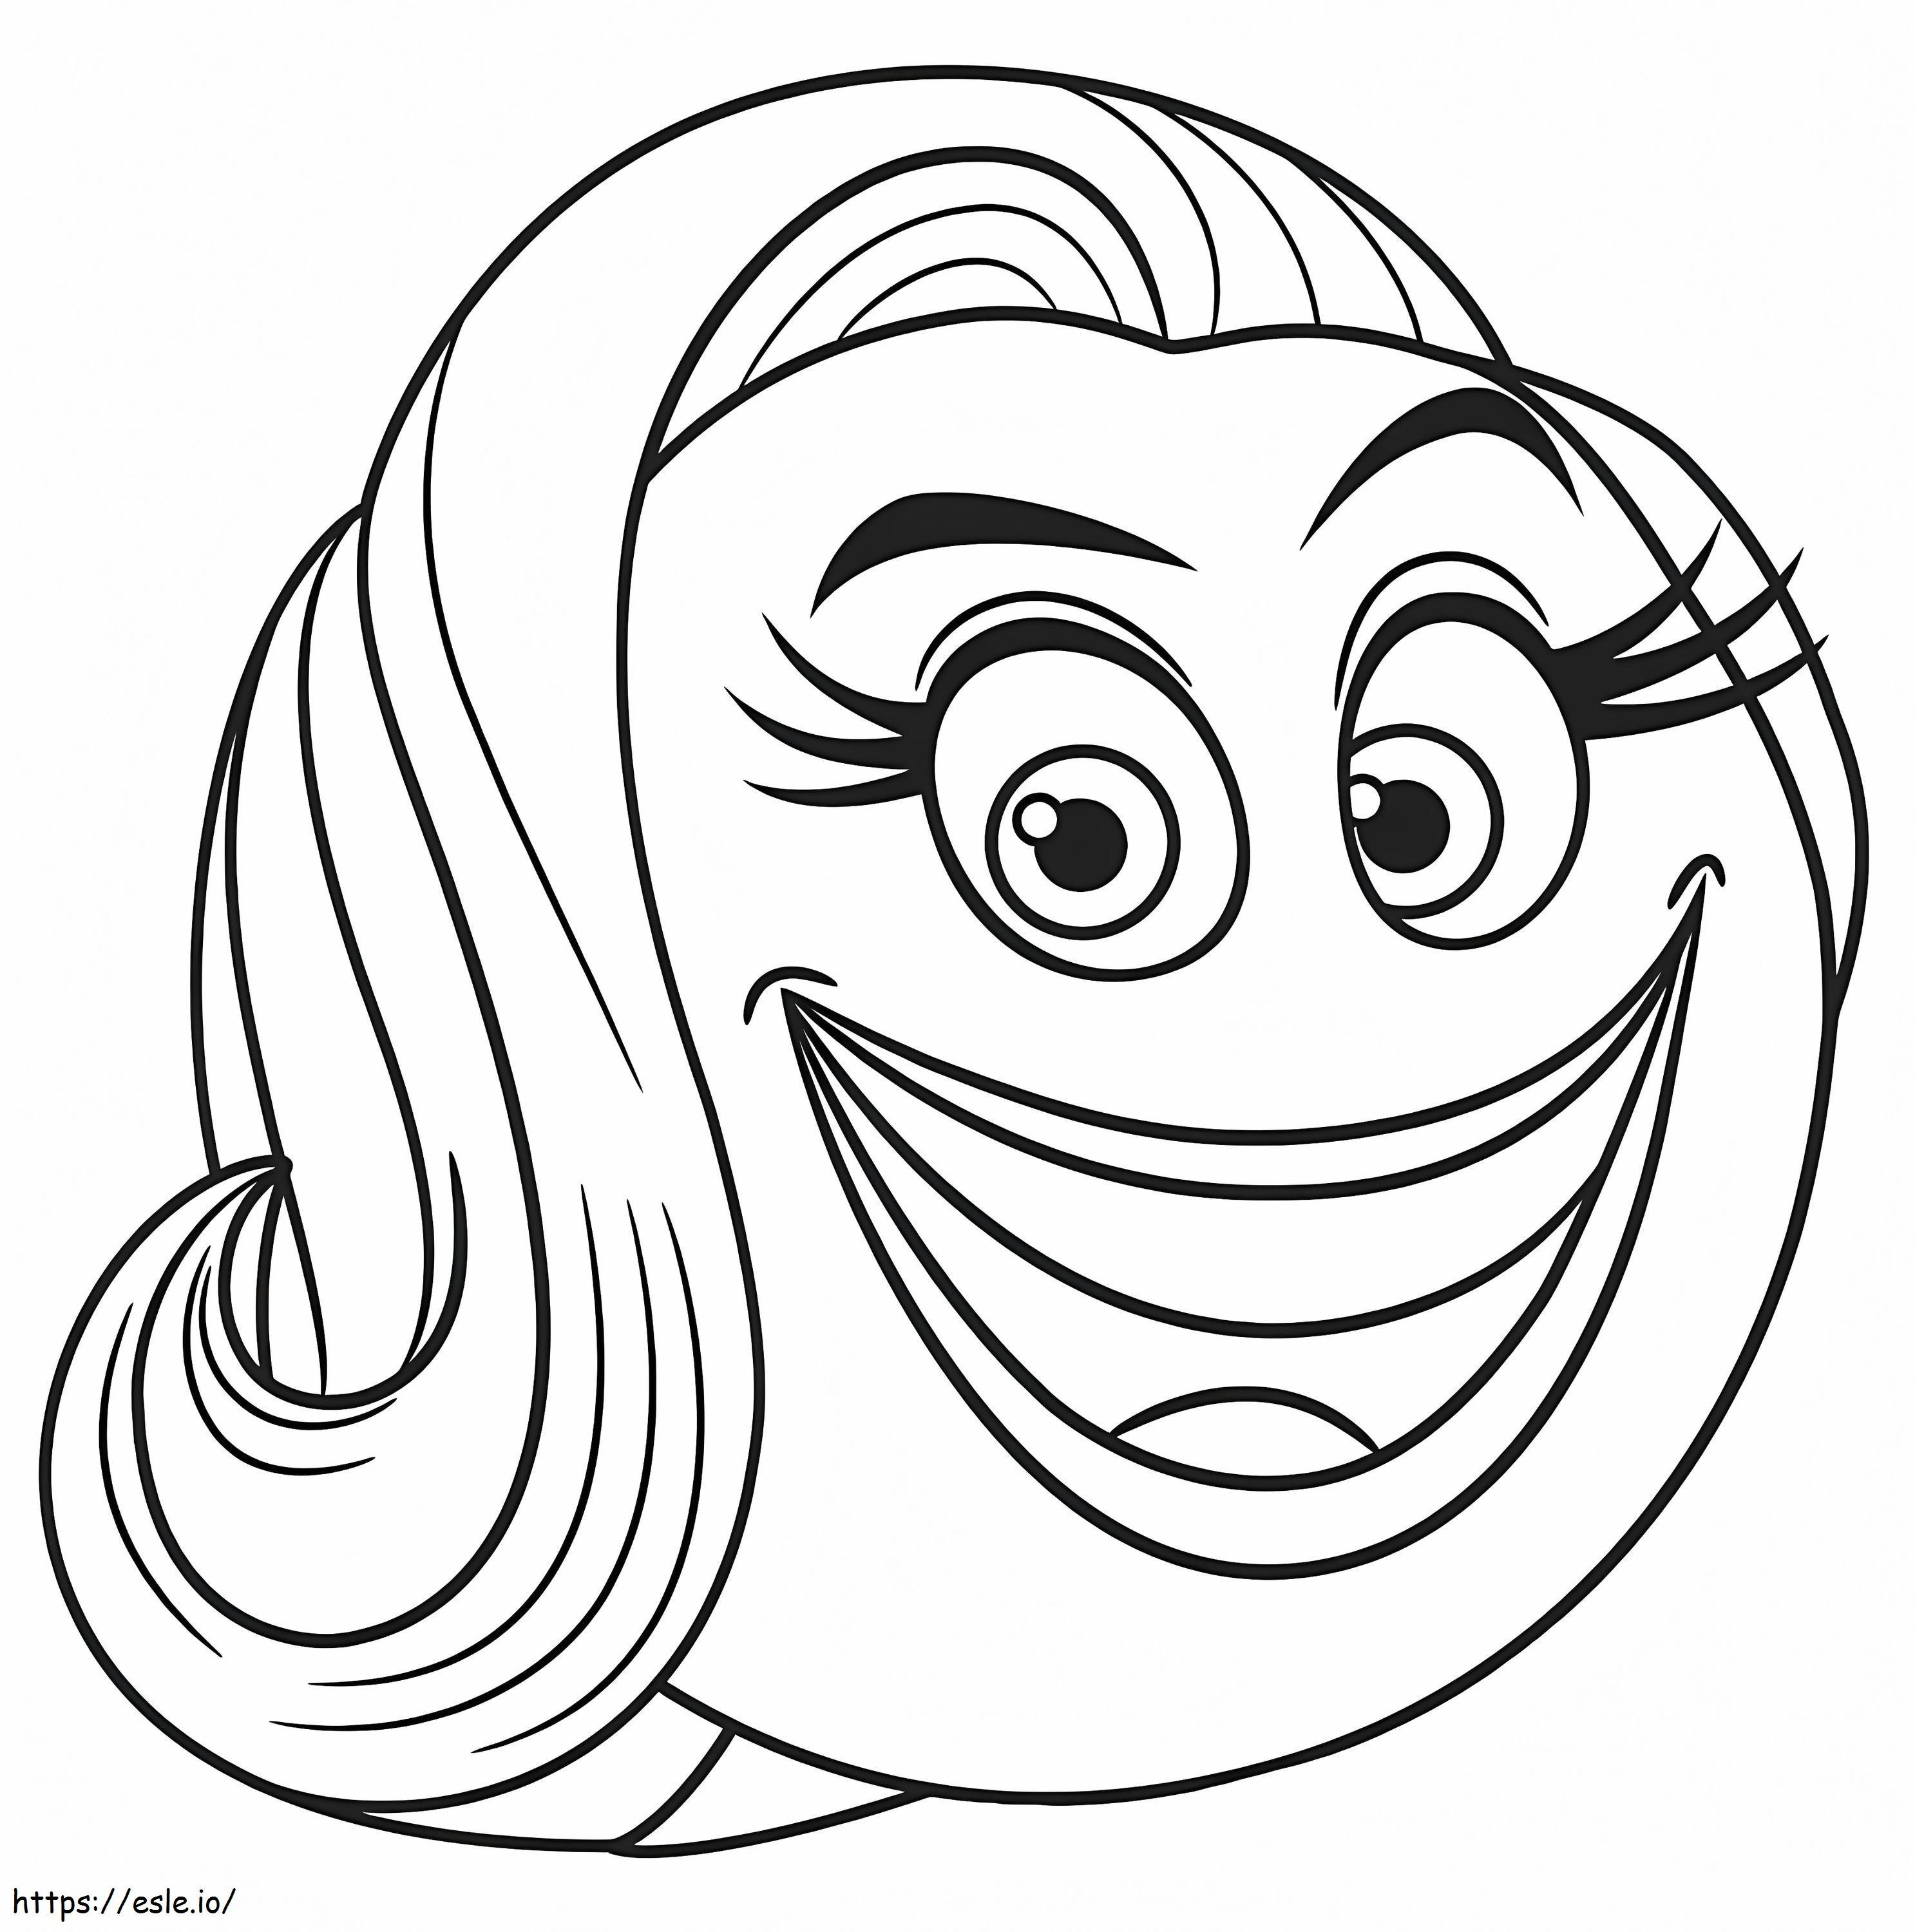 Smiler From The Emoji Movie coloring page